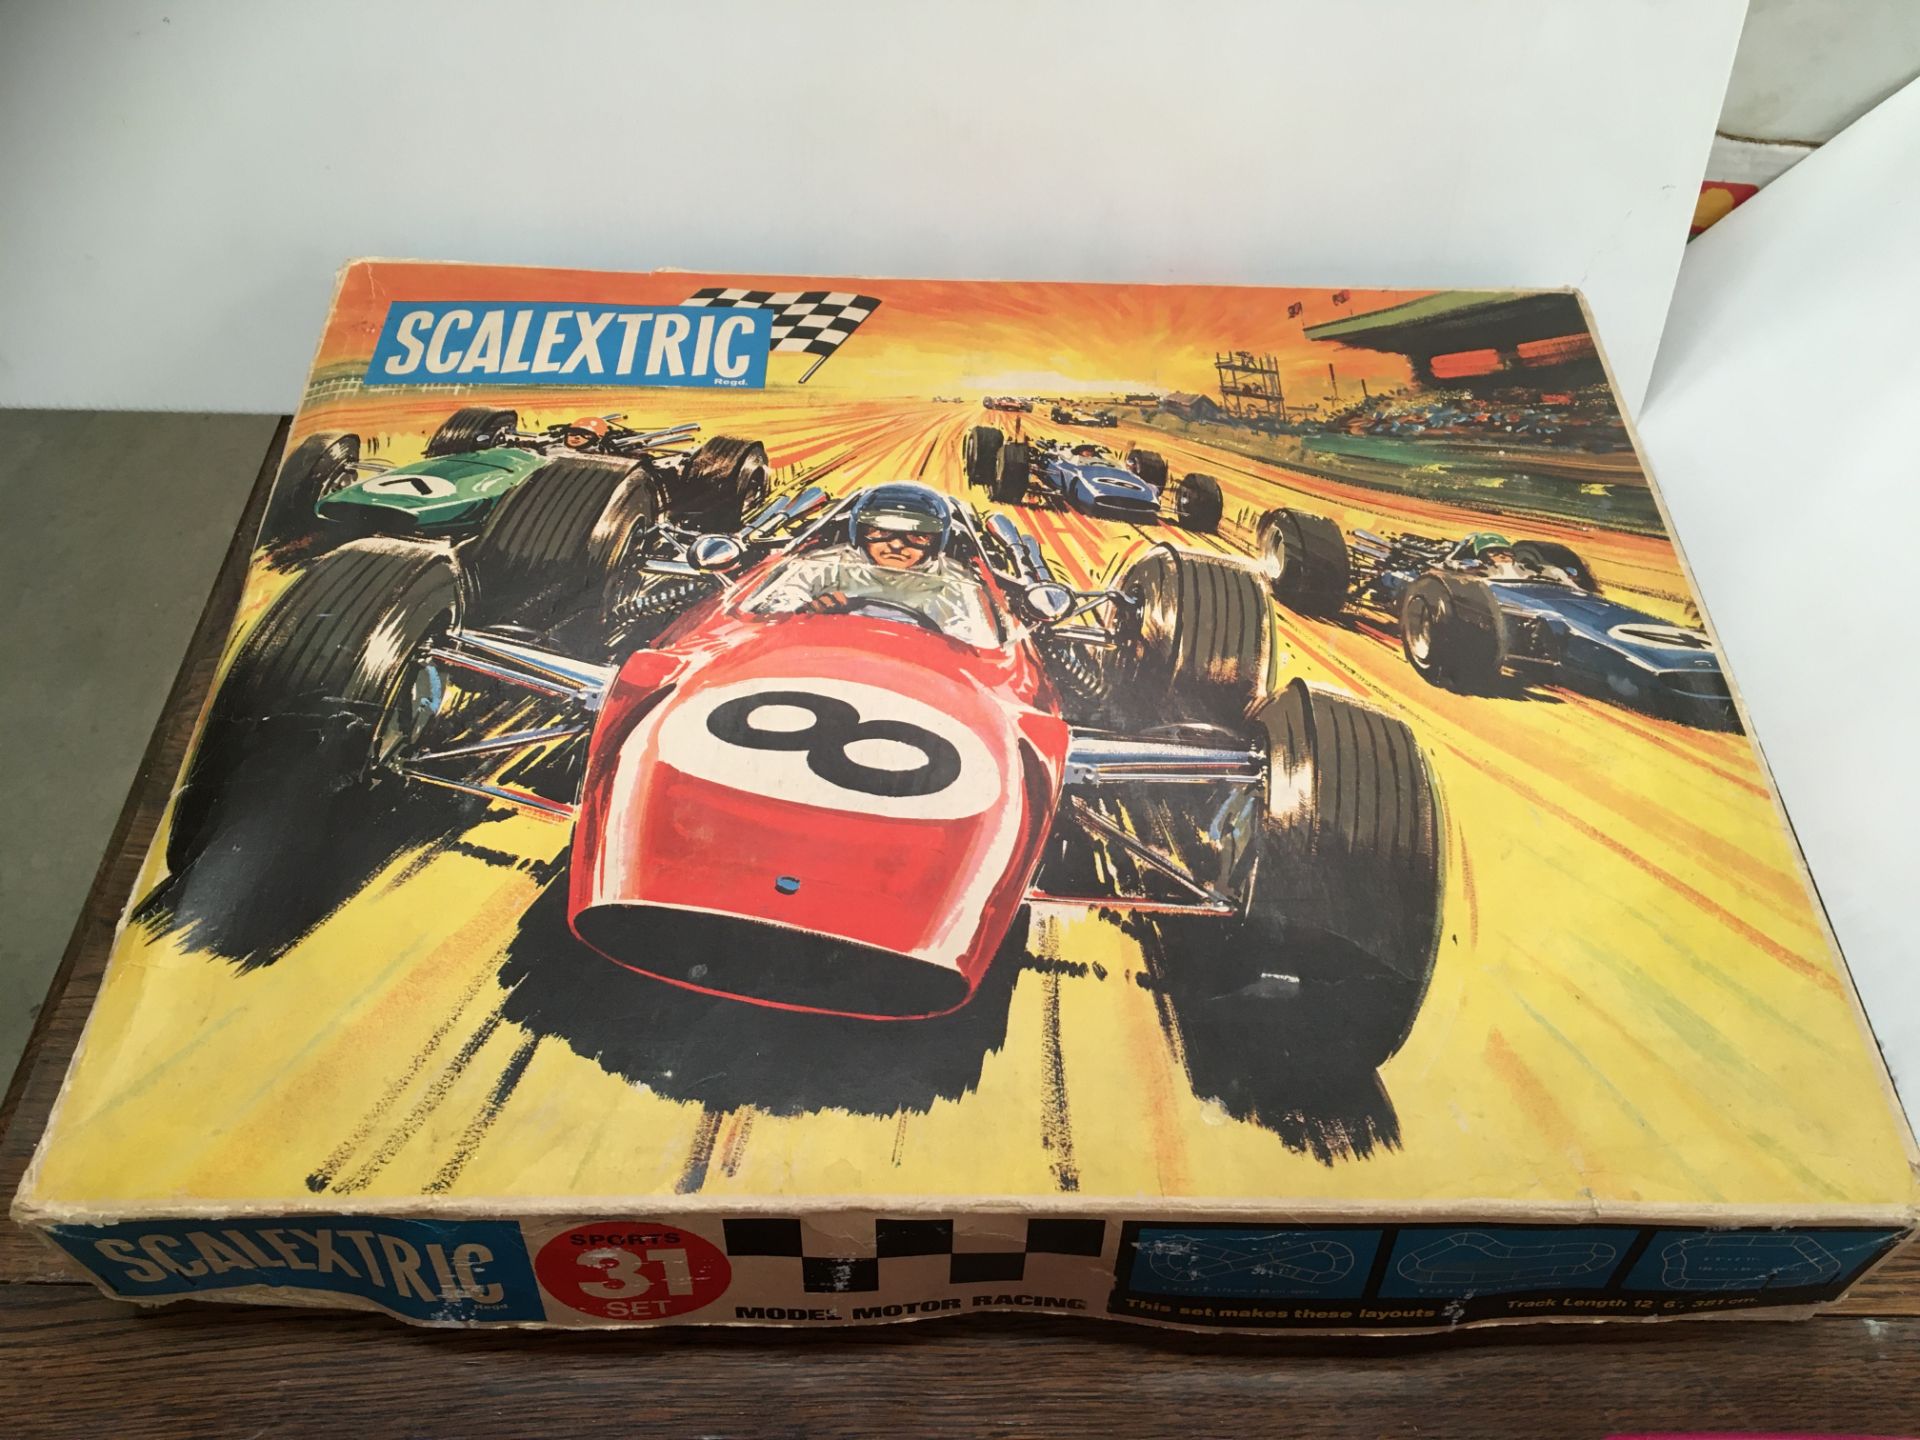 A Mini Models Ltd Scalextric Sports 31 set (boxed) - playworn and maybe incomplete - Image 2 of 2